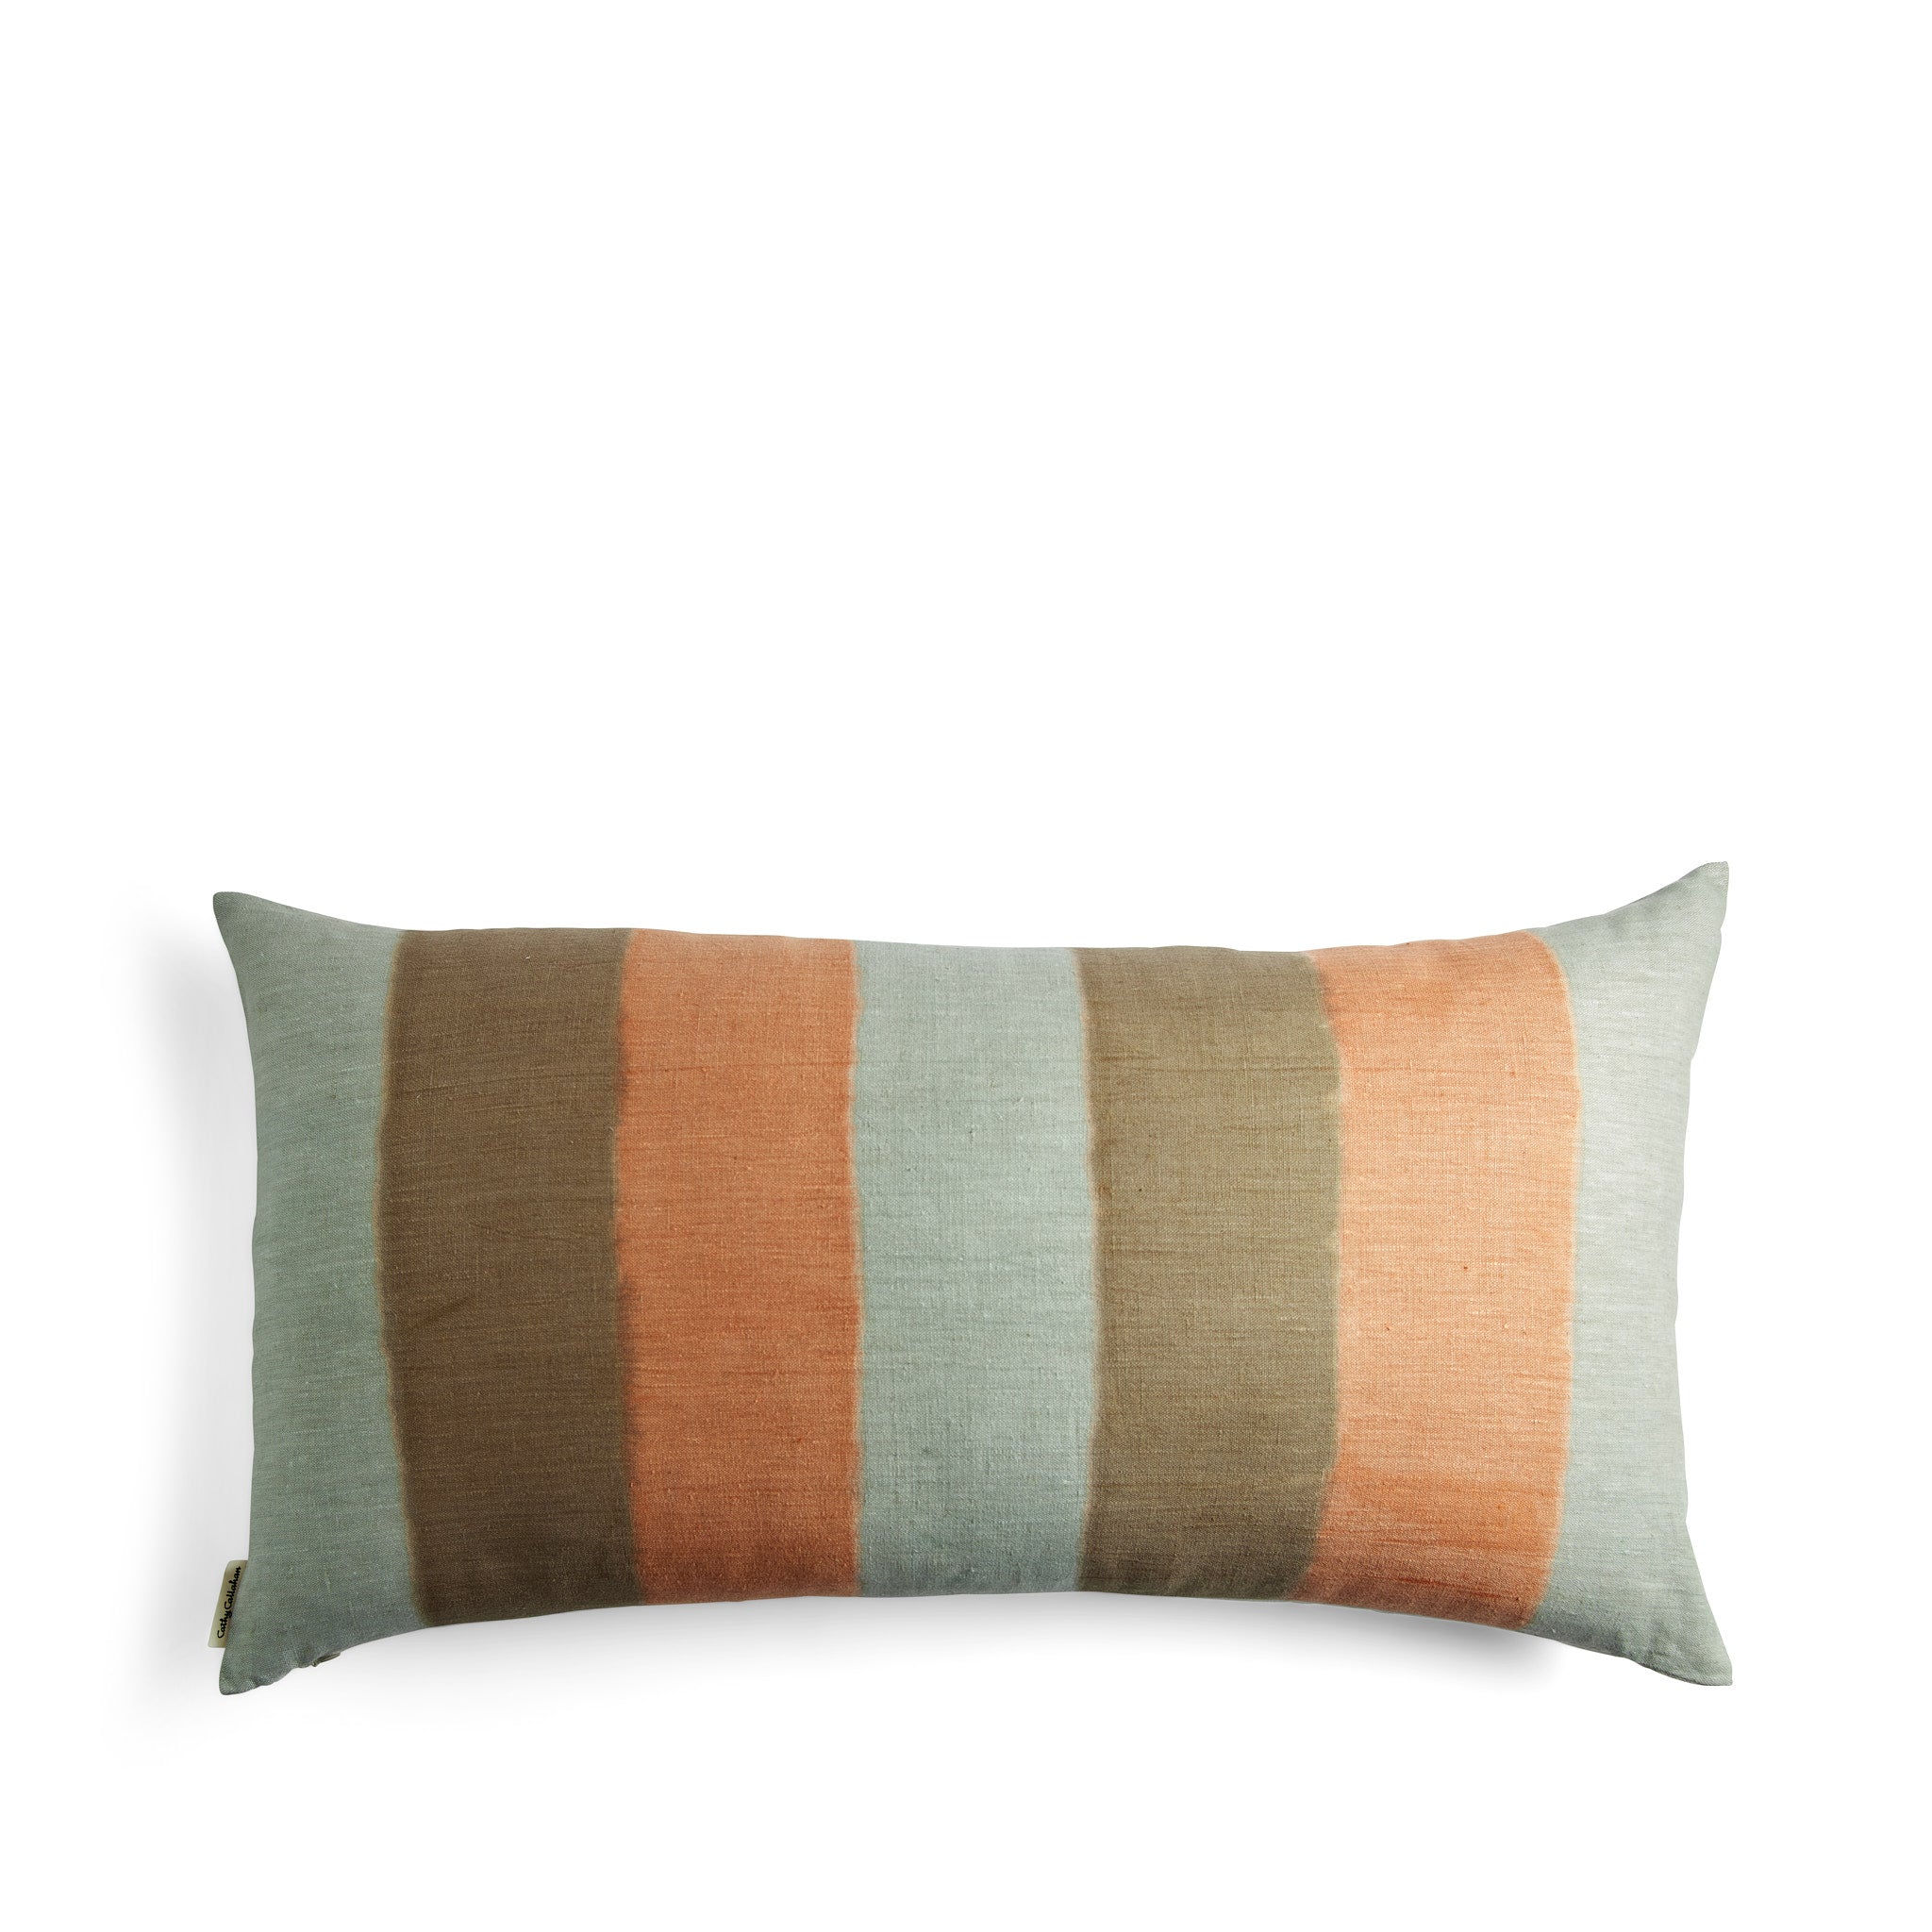 Hand Painted Color Block Pillow Zoom Image 1